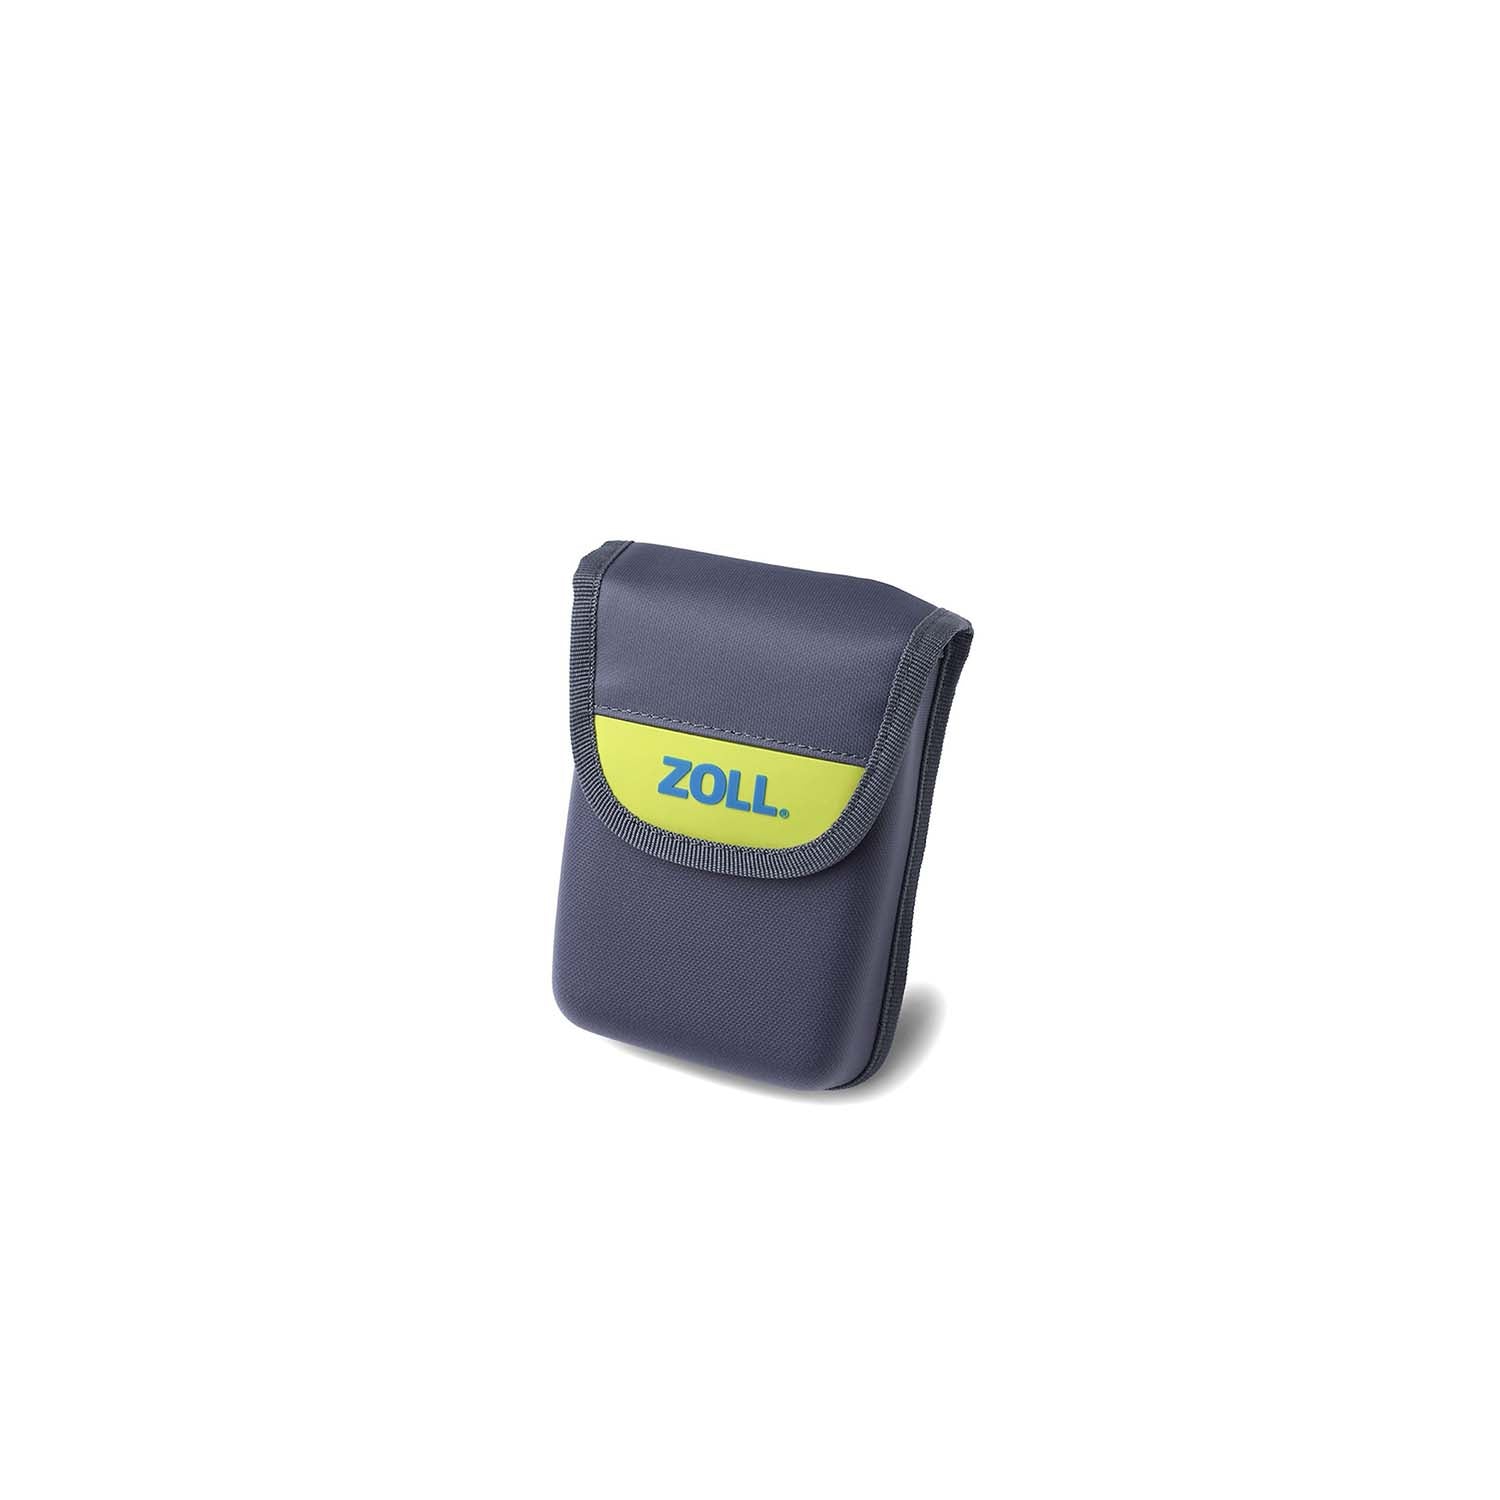 Zoll AED 3 Carry Case Spare Battery Case